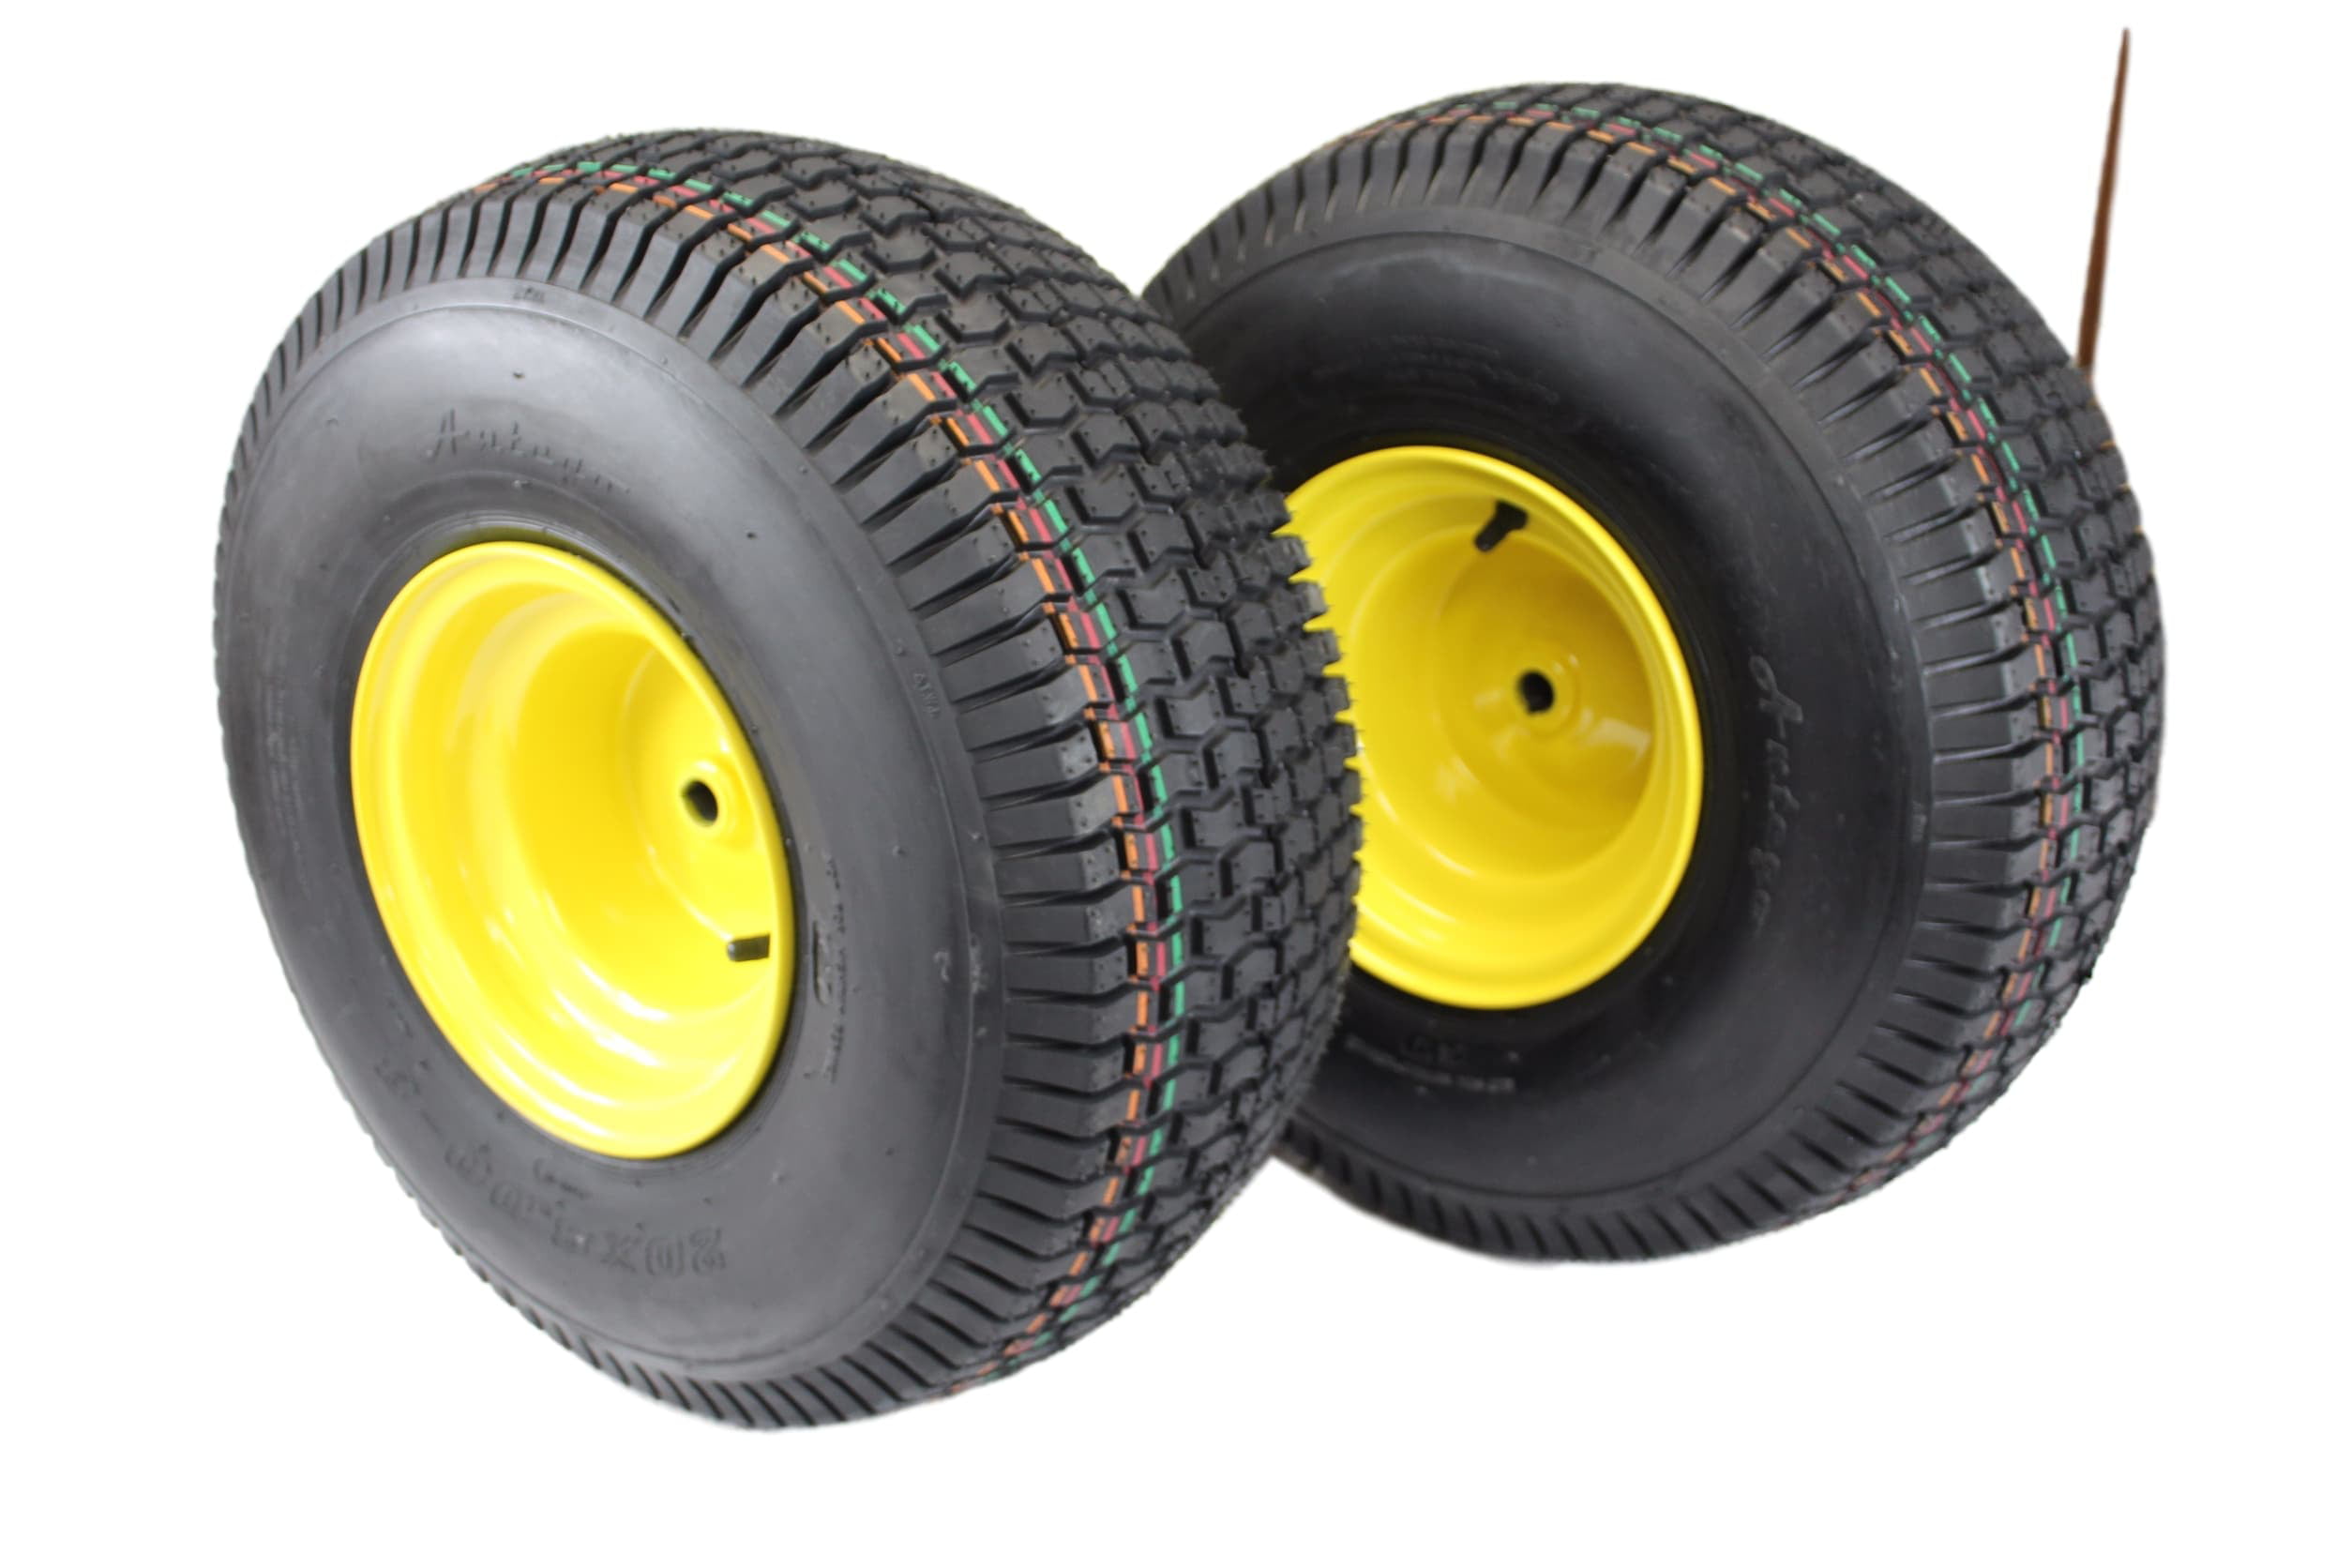 Two 20X10.00-8 4 Ply Tubeless Turf Tire Tractor Riding Mower Pair Two 20x10x8 